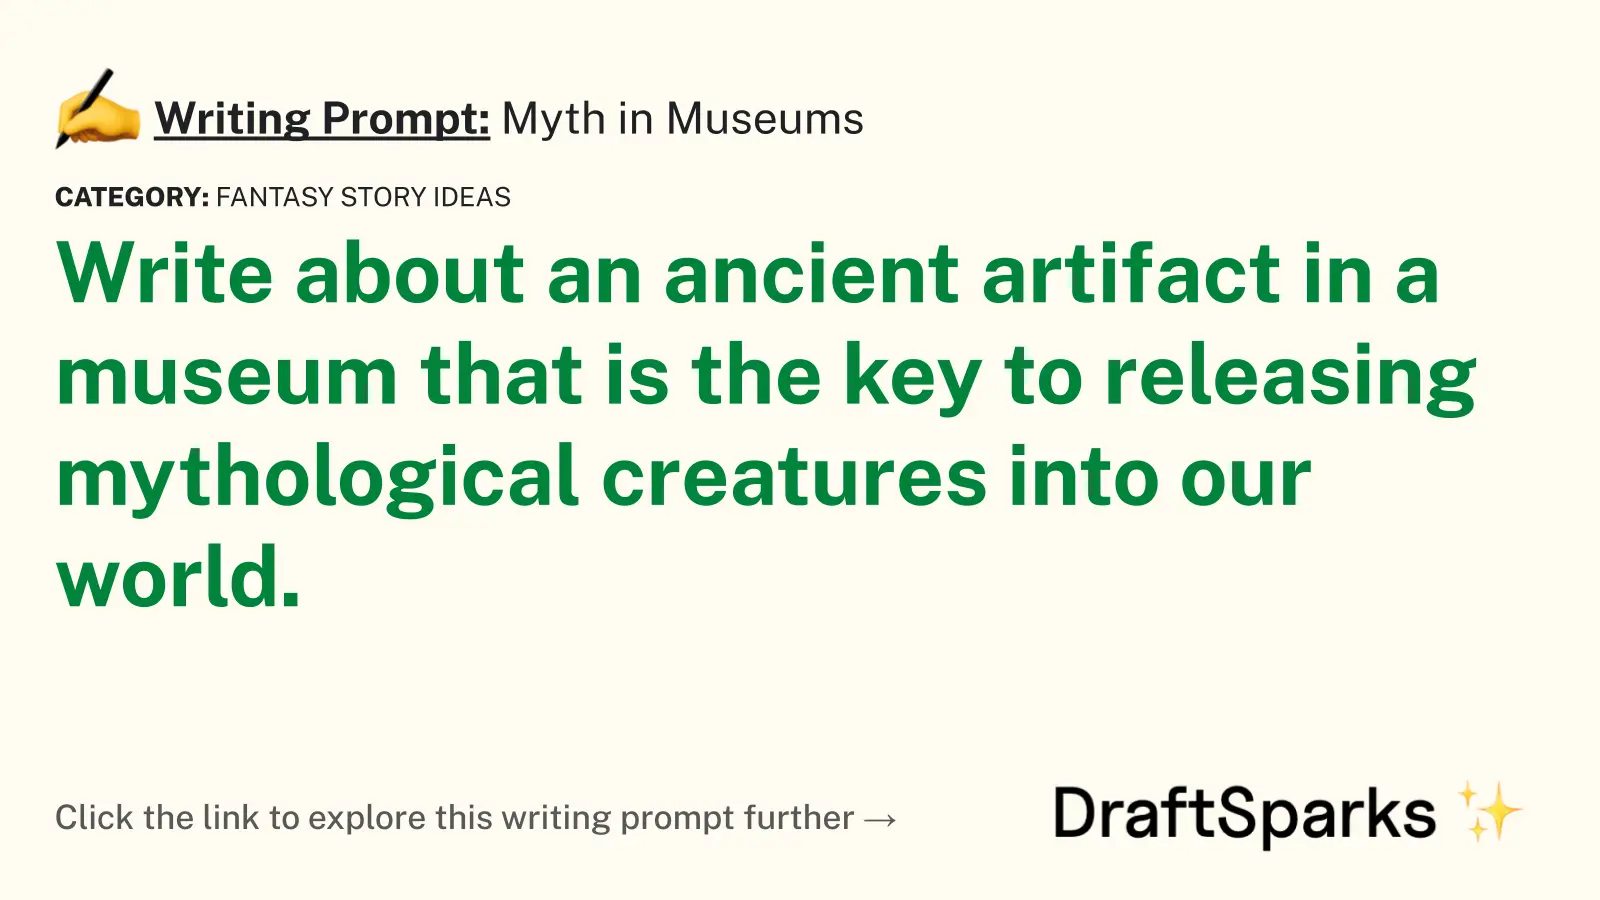 Myth in Museums